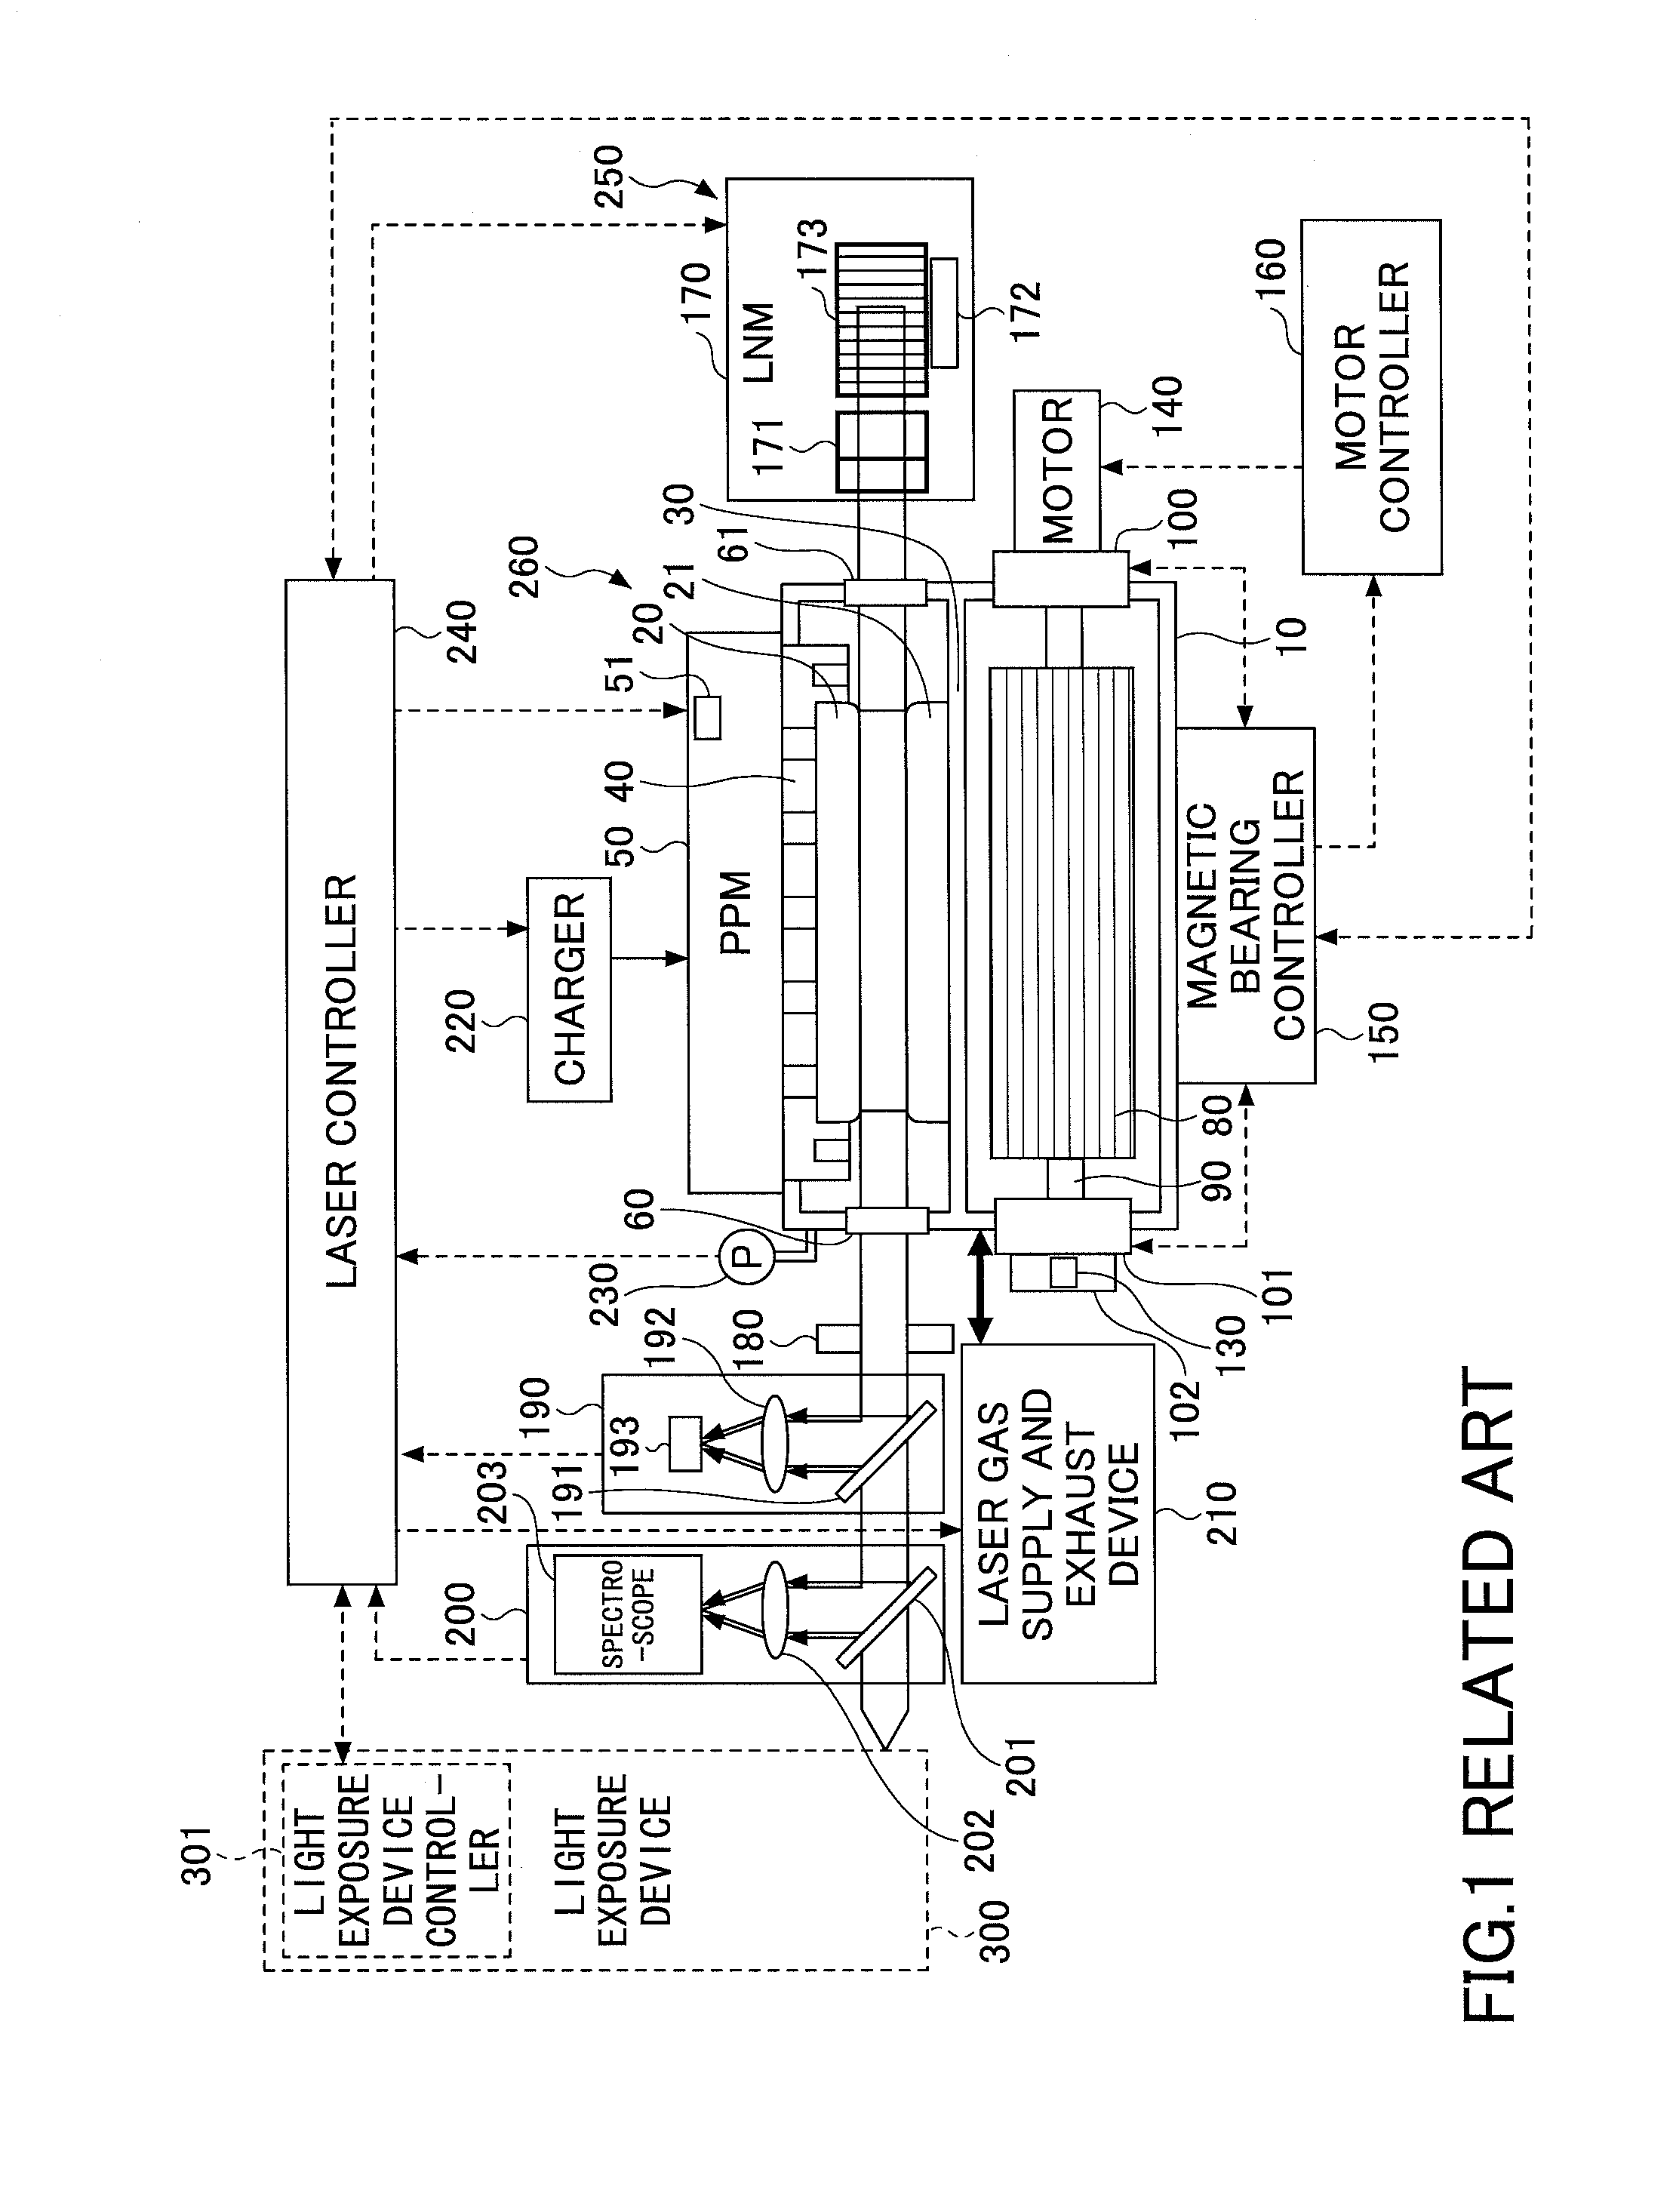 Discharge-pumped gas laser device